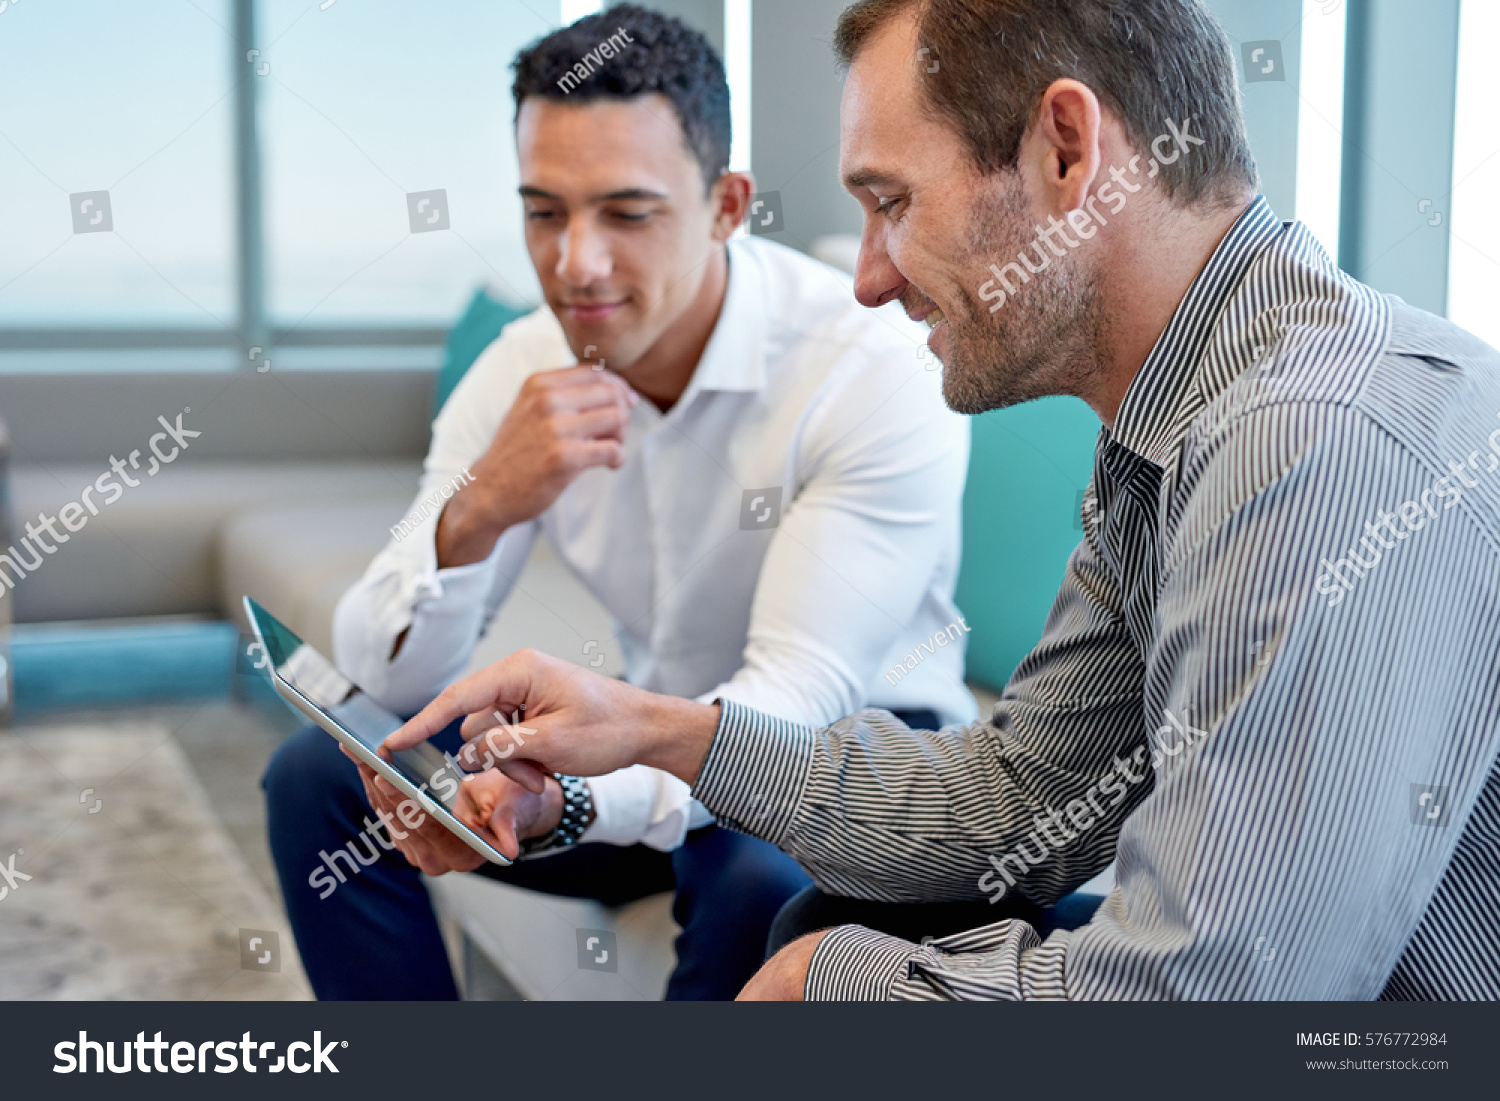 Two smiling male work coworkers sitting on a sofa in a modern office talking together over a digital tablet #576772984